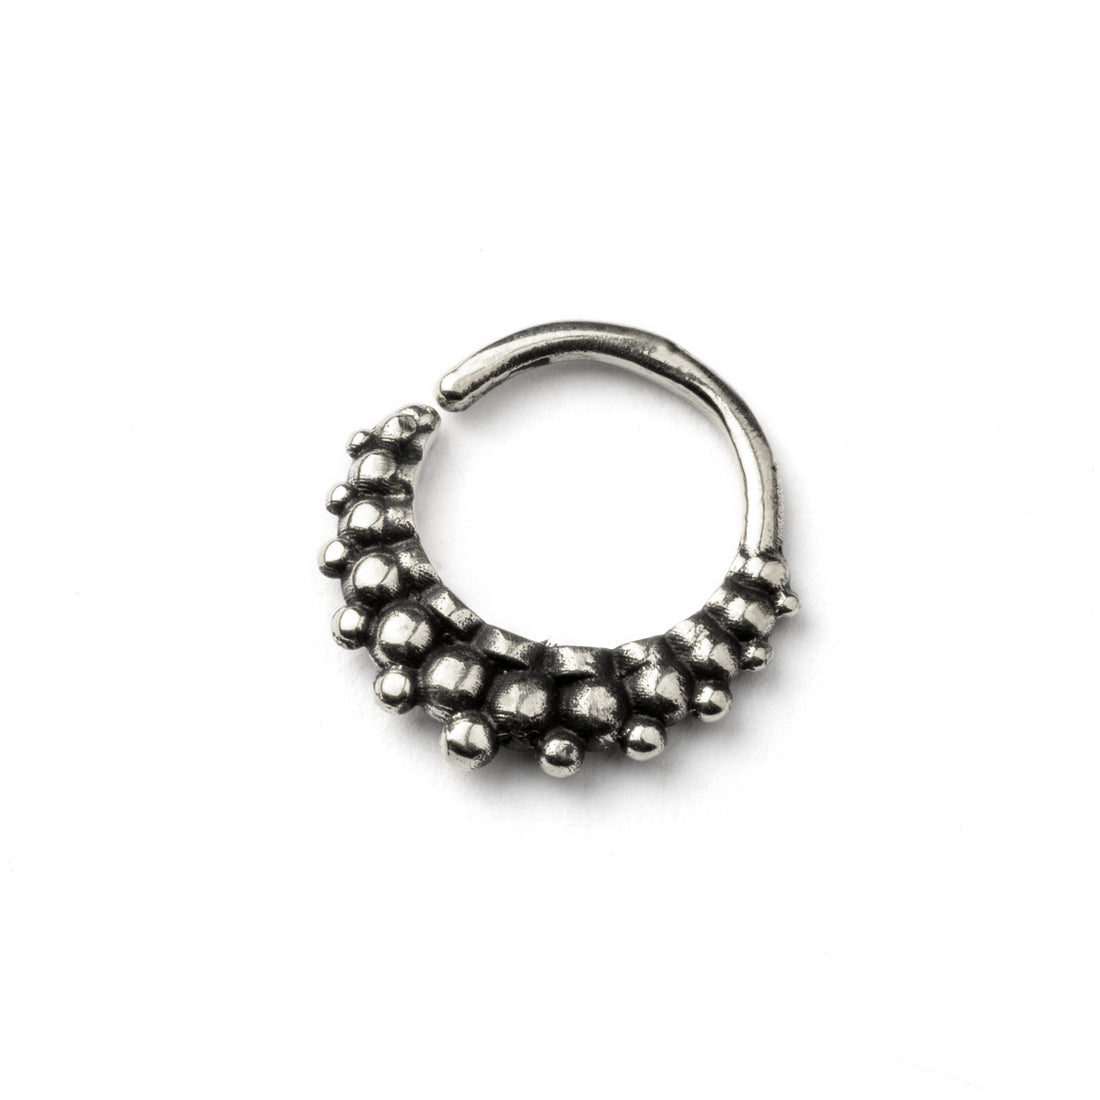 Rajee Silver Septum Ring right side view